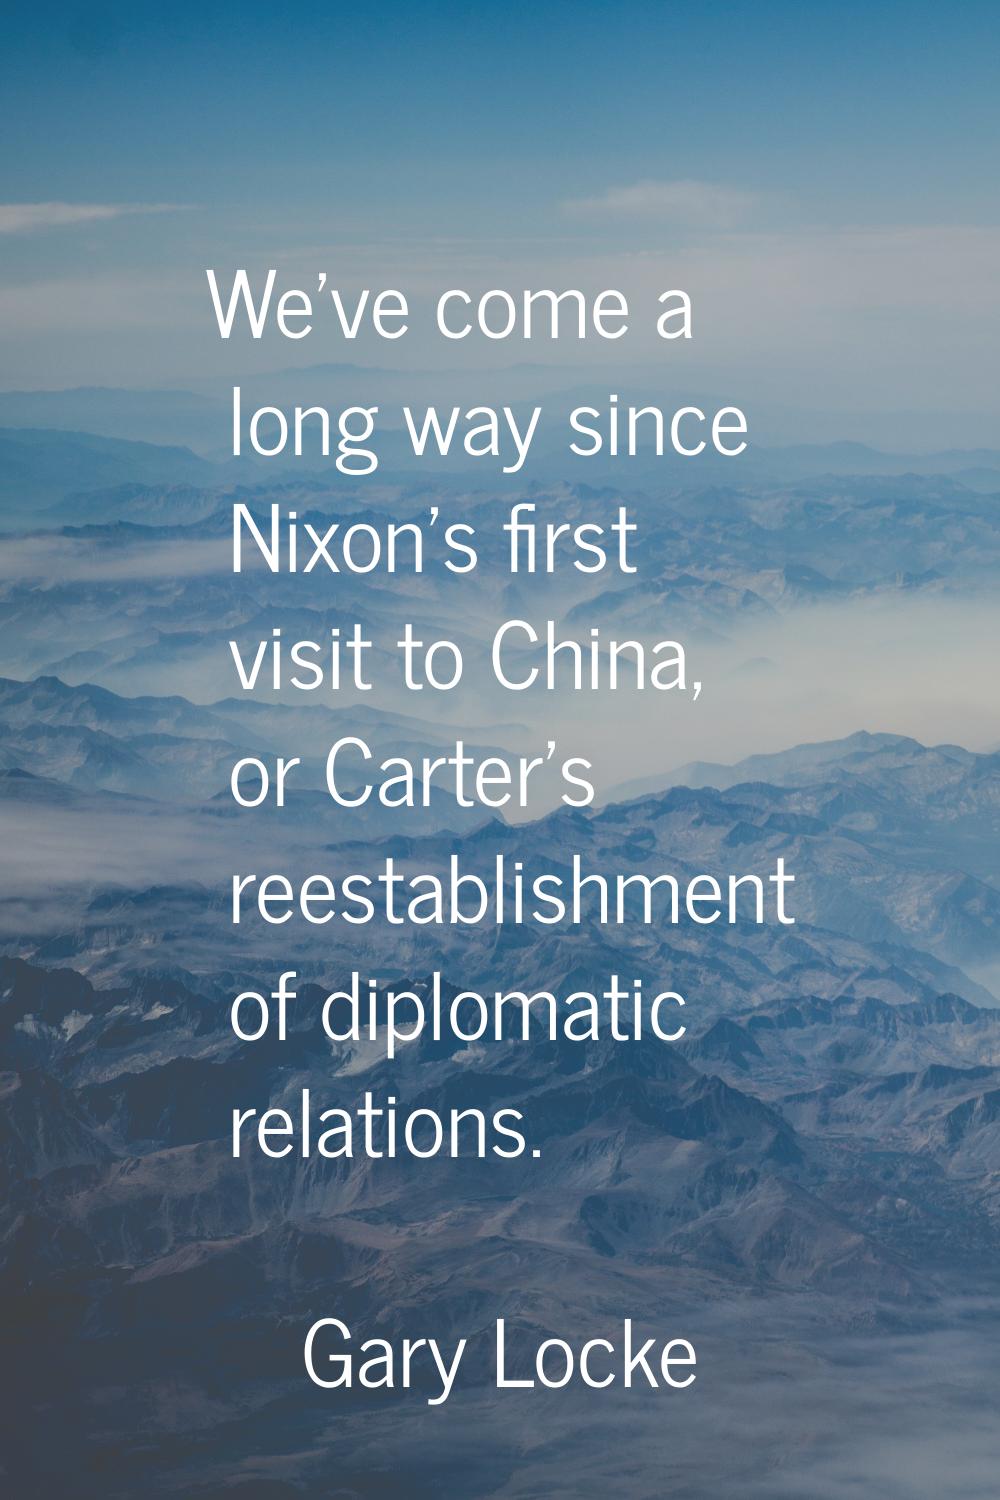 We've come a long way since Nixon's first visit to China, or Carter's reestablishment of diplomatic